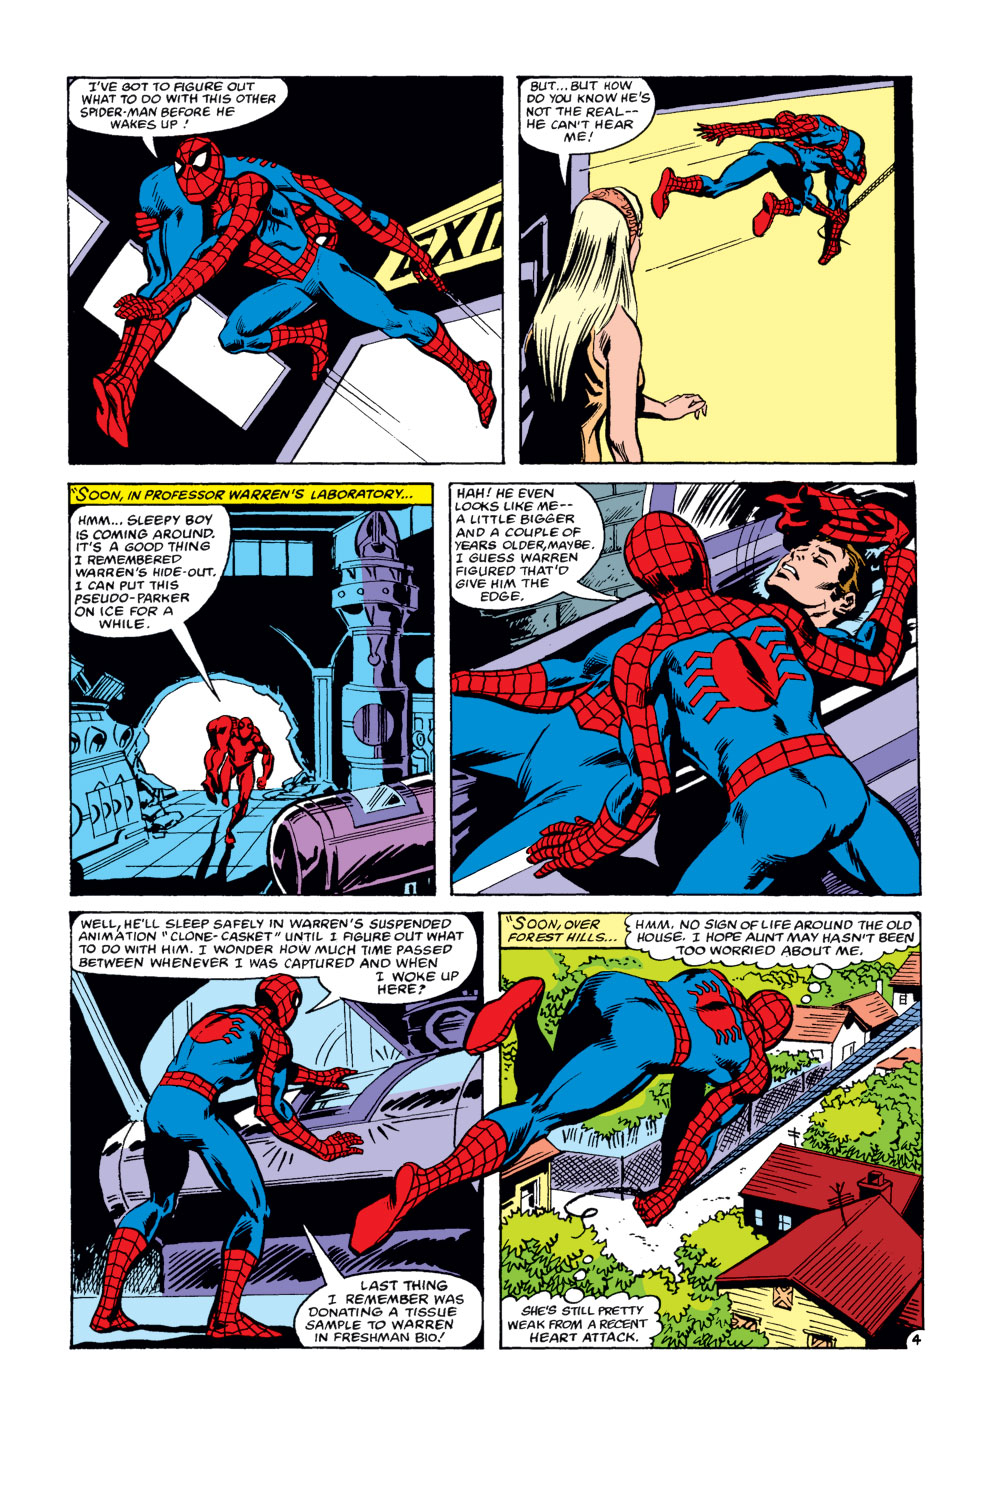 What If? (1977) issue 30 - Spider-Man's clone lived - Page 5